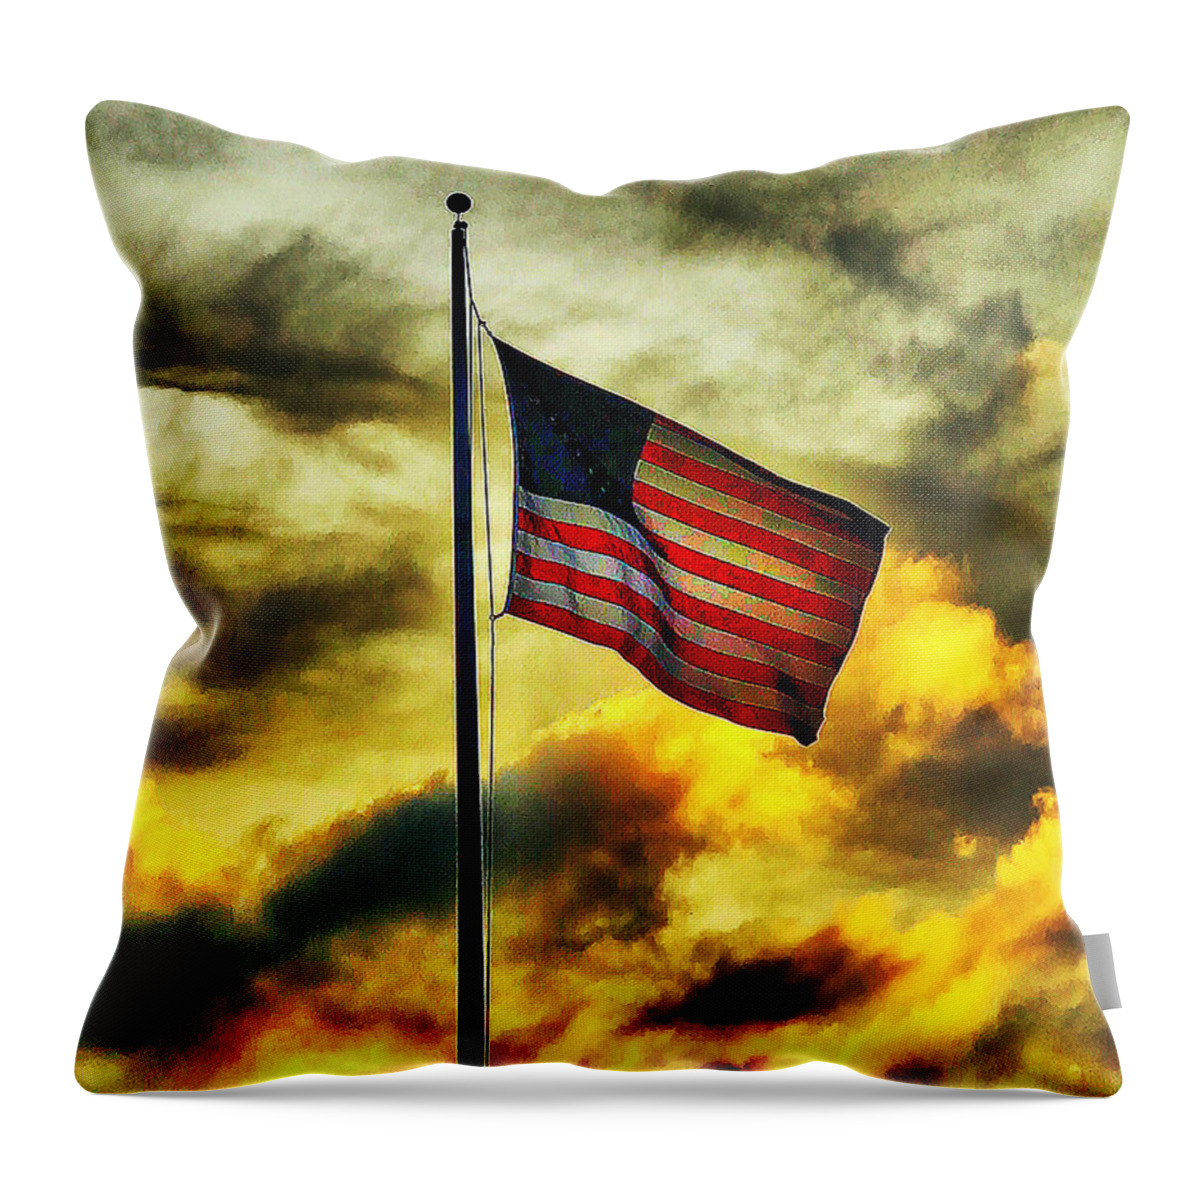  Throw Pillow featuring the photograph Sunset USA by Stephen Dorton